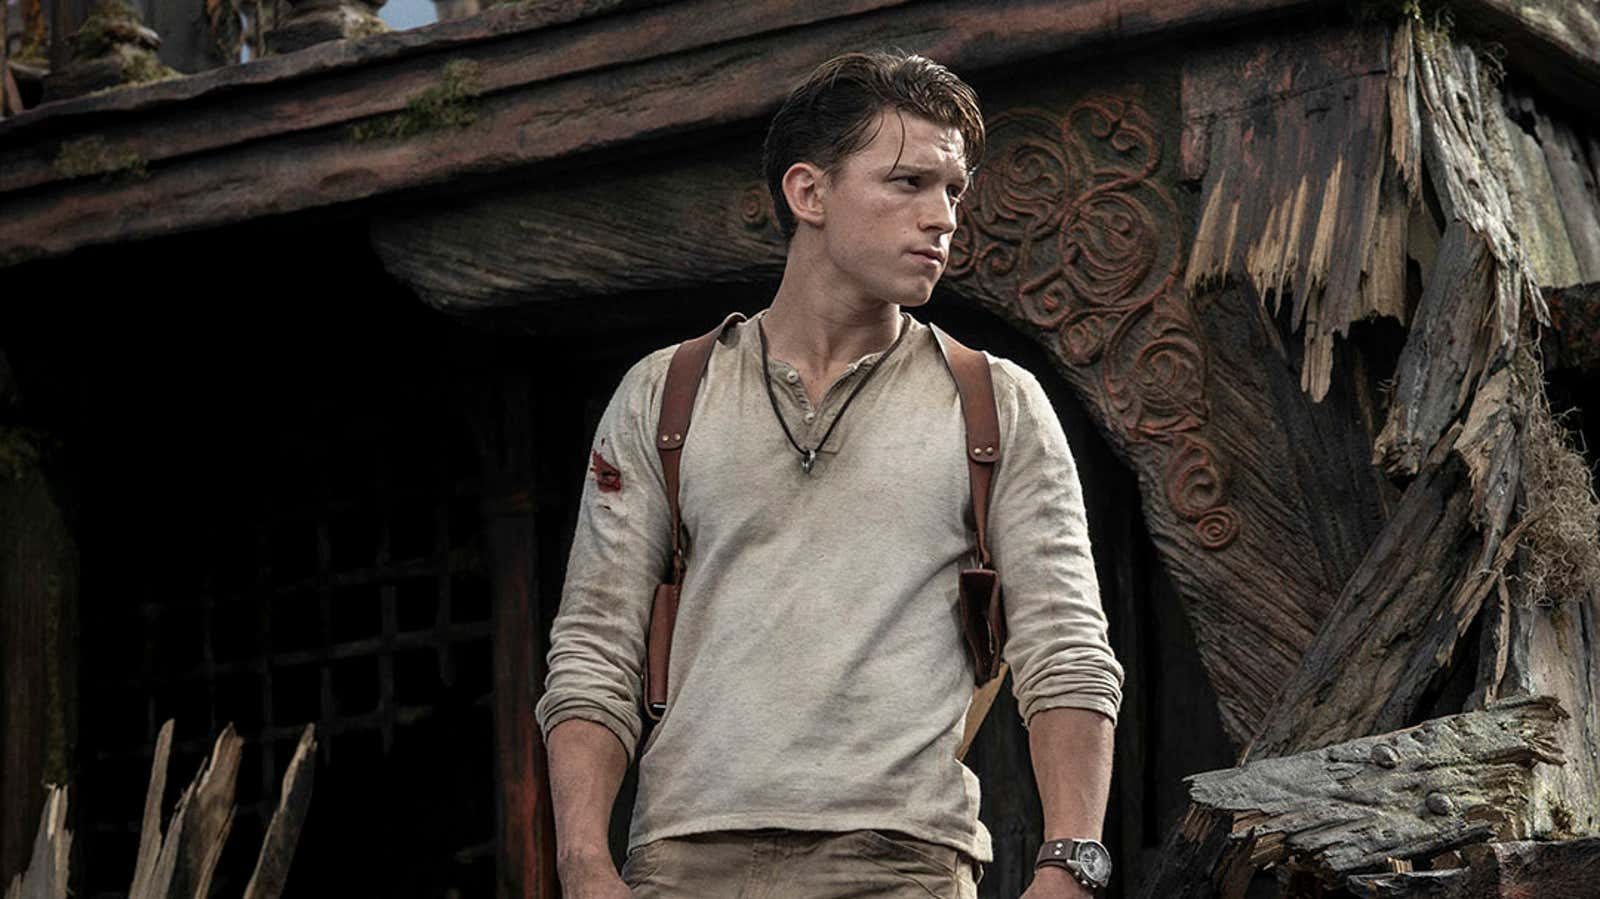 Vietnam Blocks Sony Movie 'Uncharted' Over South China Sea Map